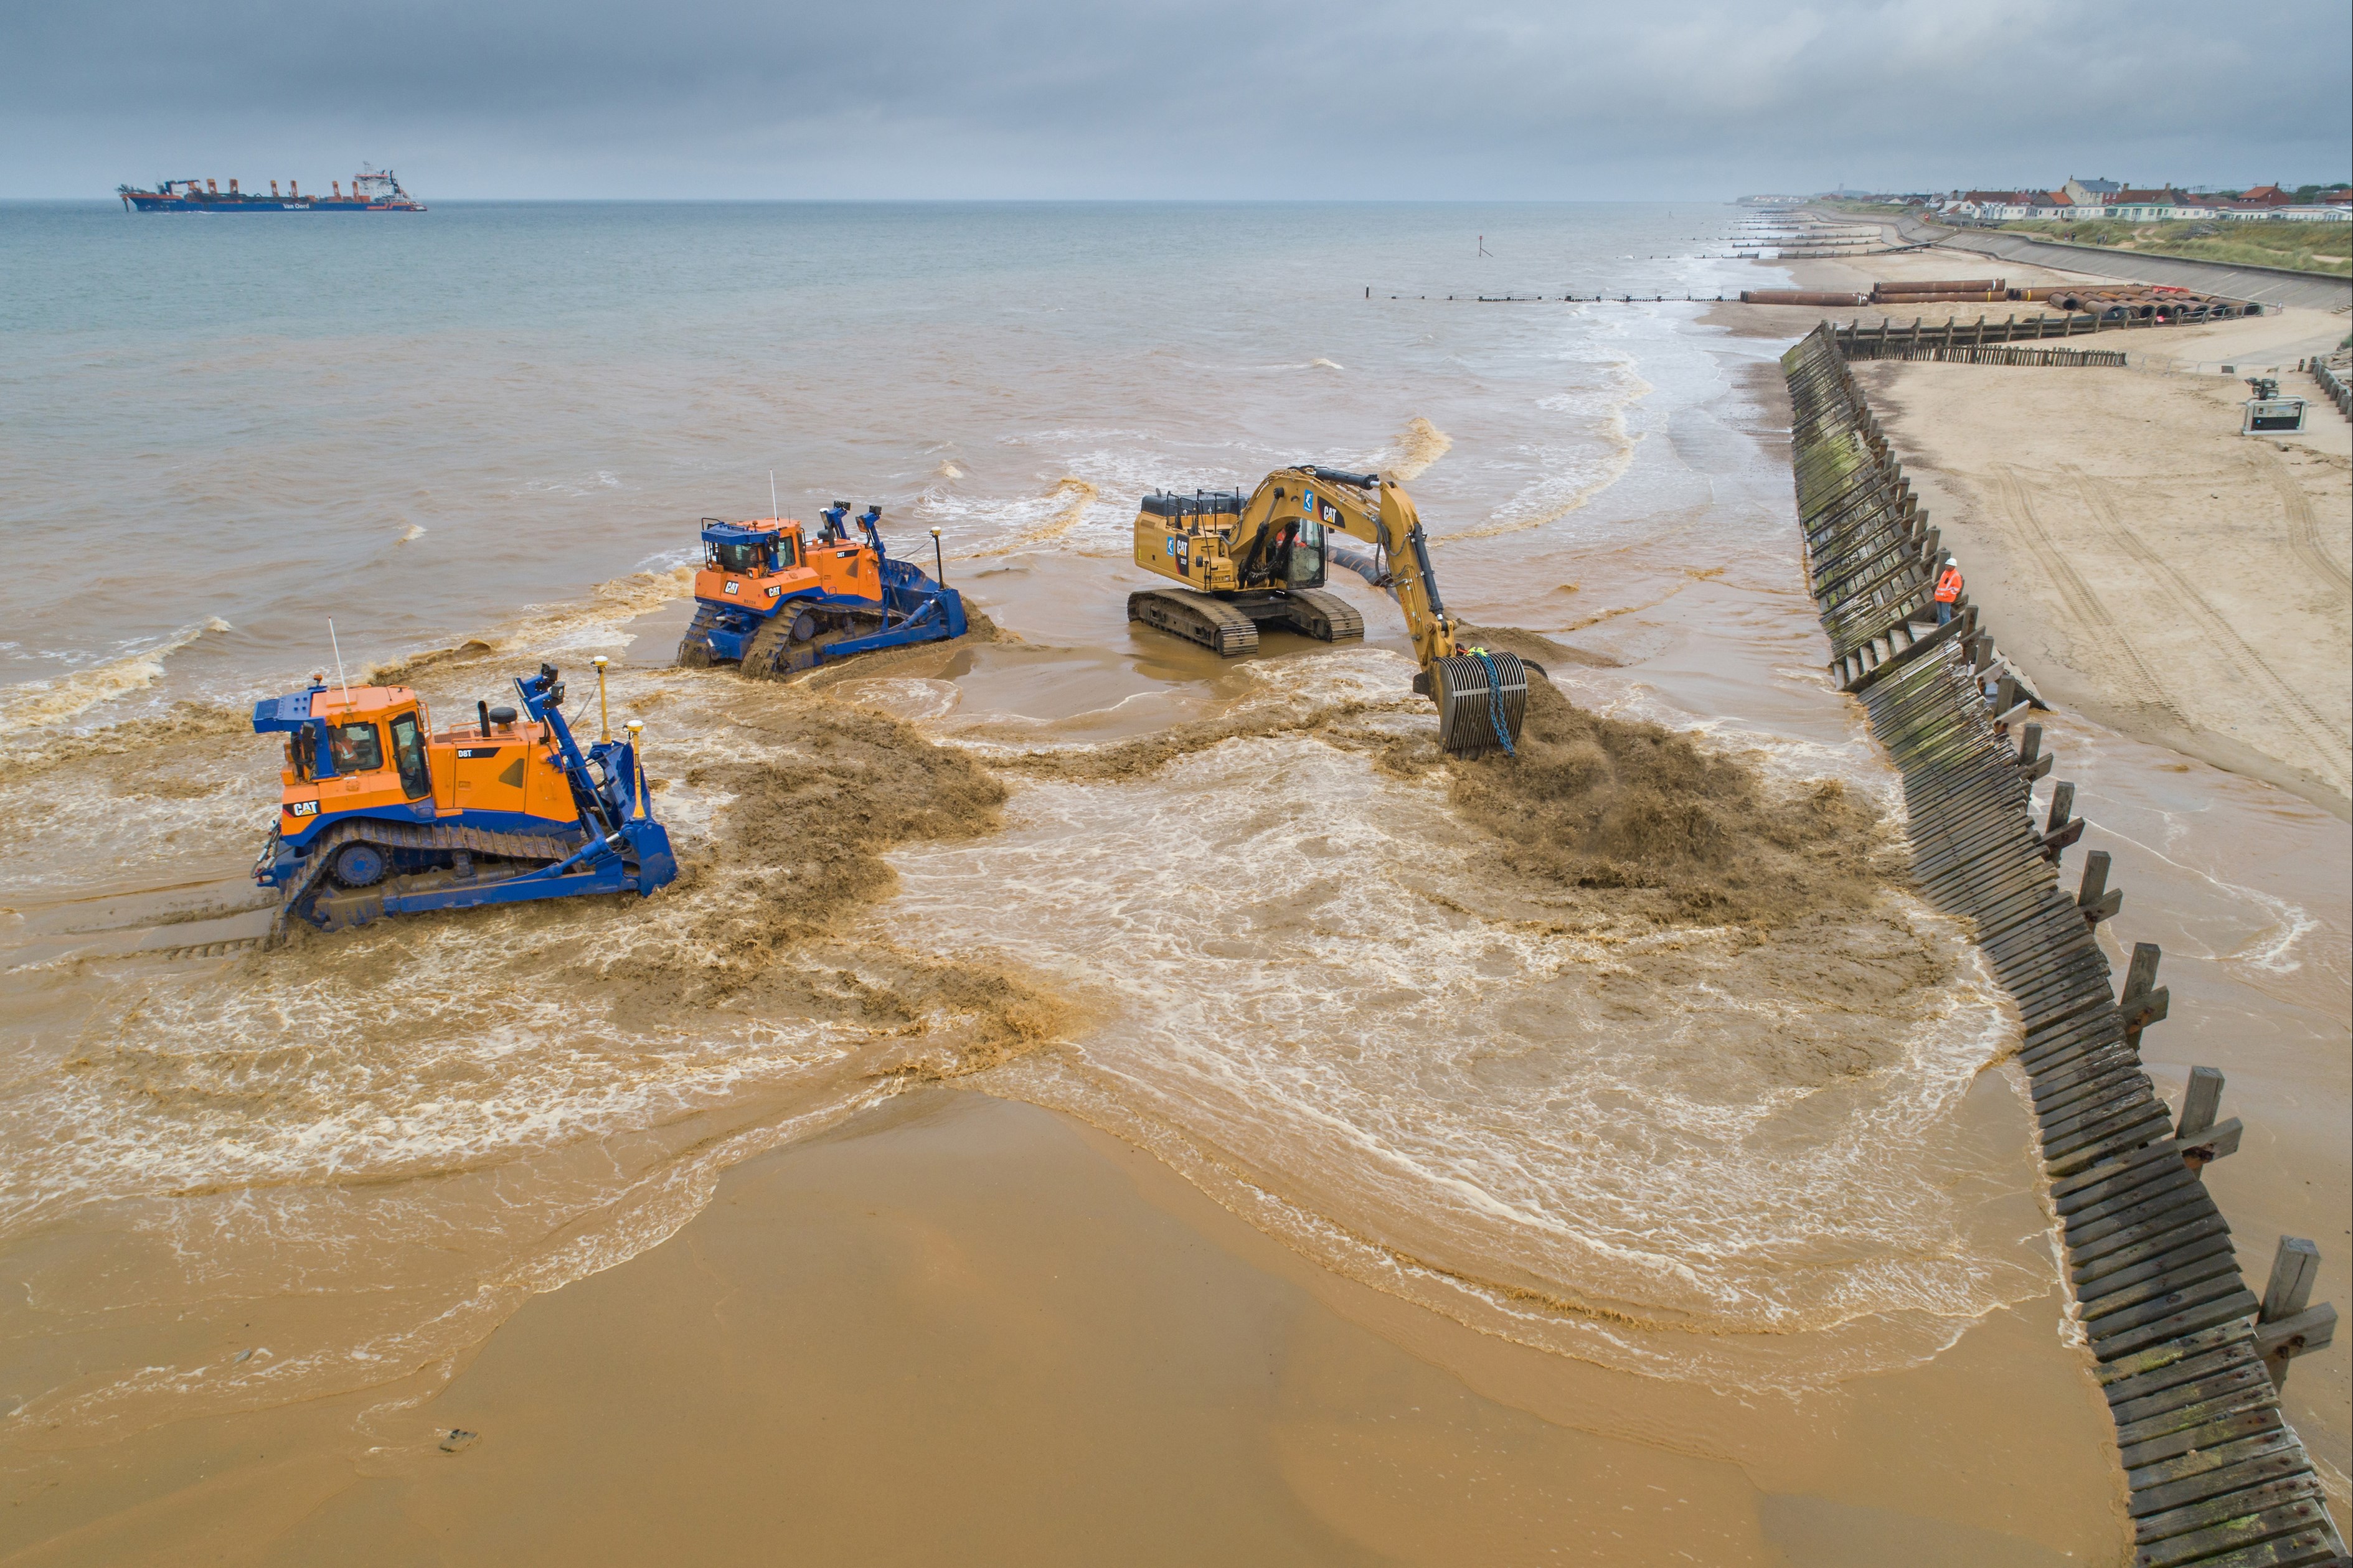 Diggers on beach at Sandscaping Scheme